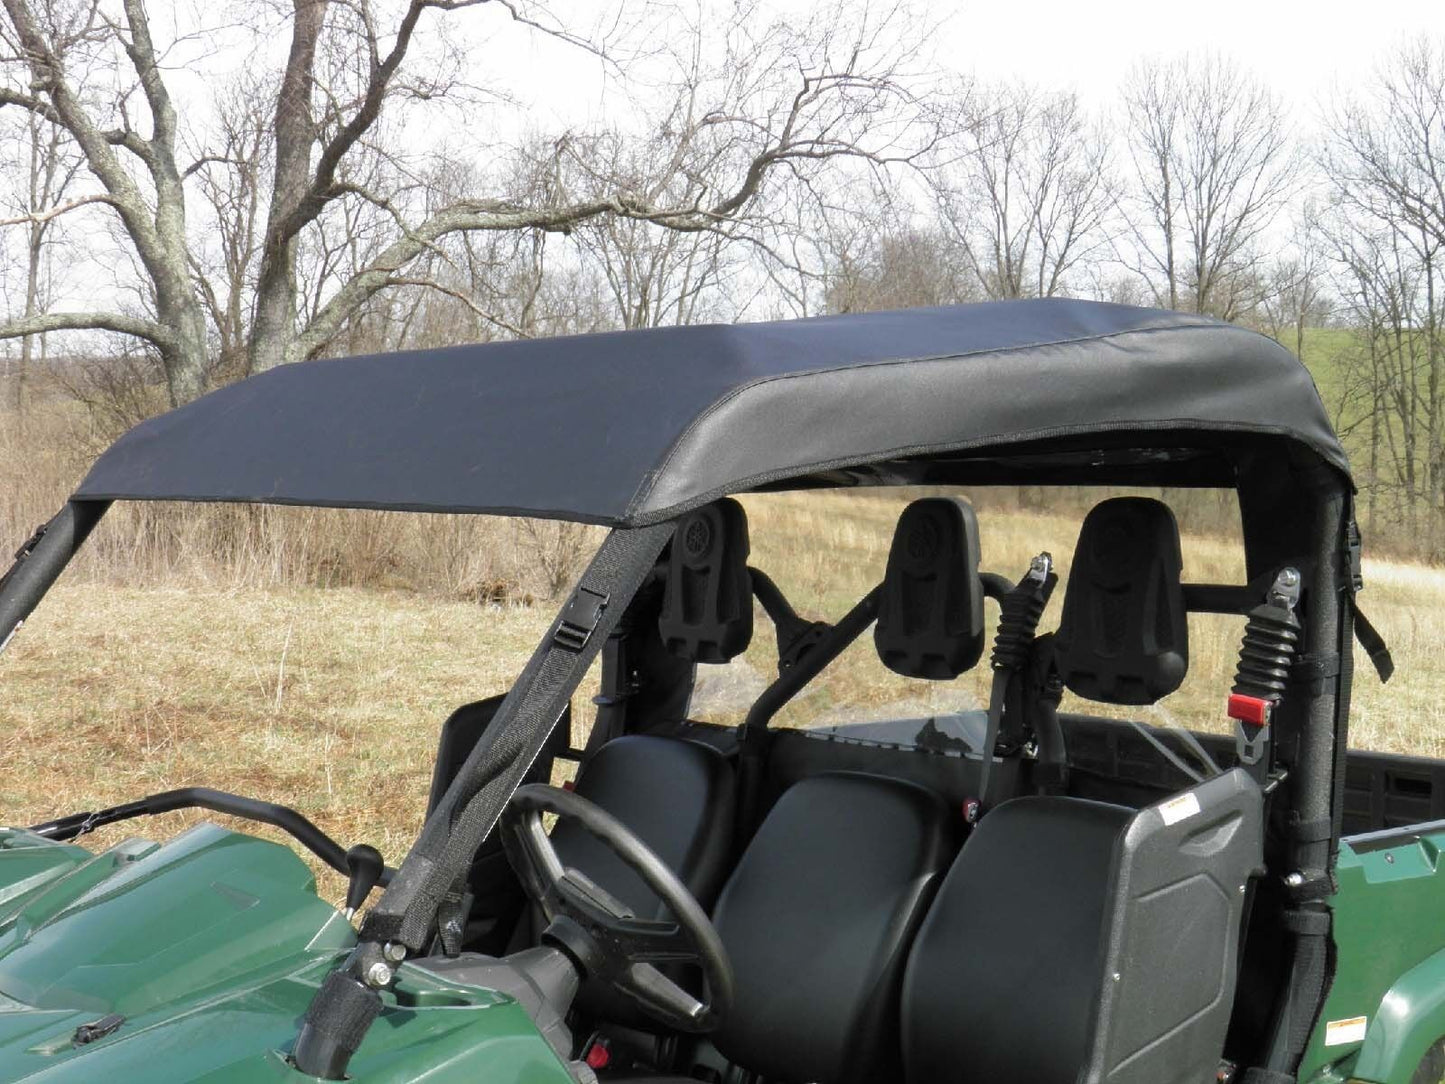 ROOF for Yamaha Viking - Puncture Proof - Soft Top - Withstands Highway Speeds